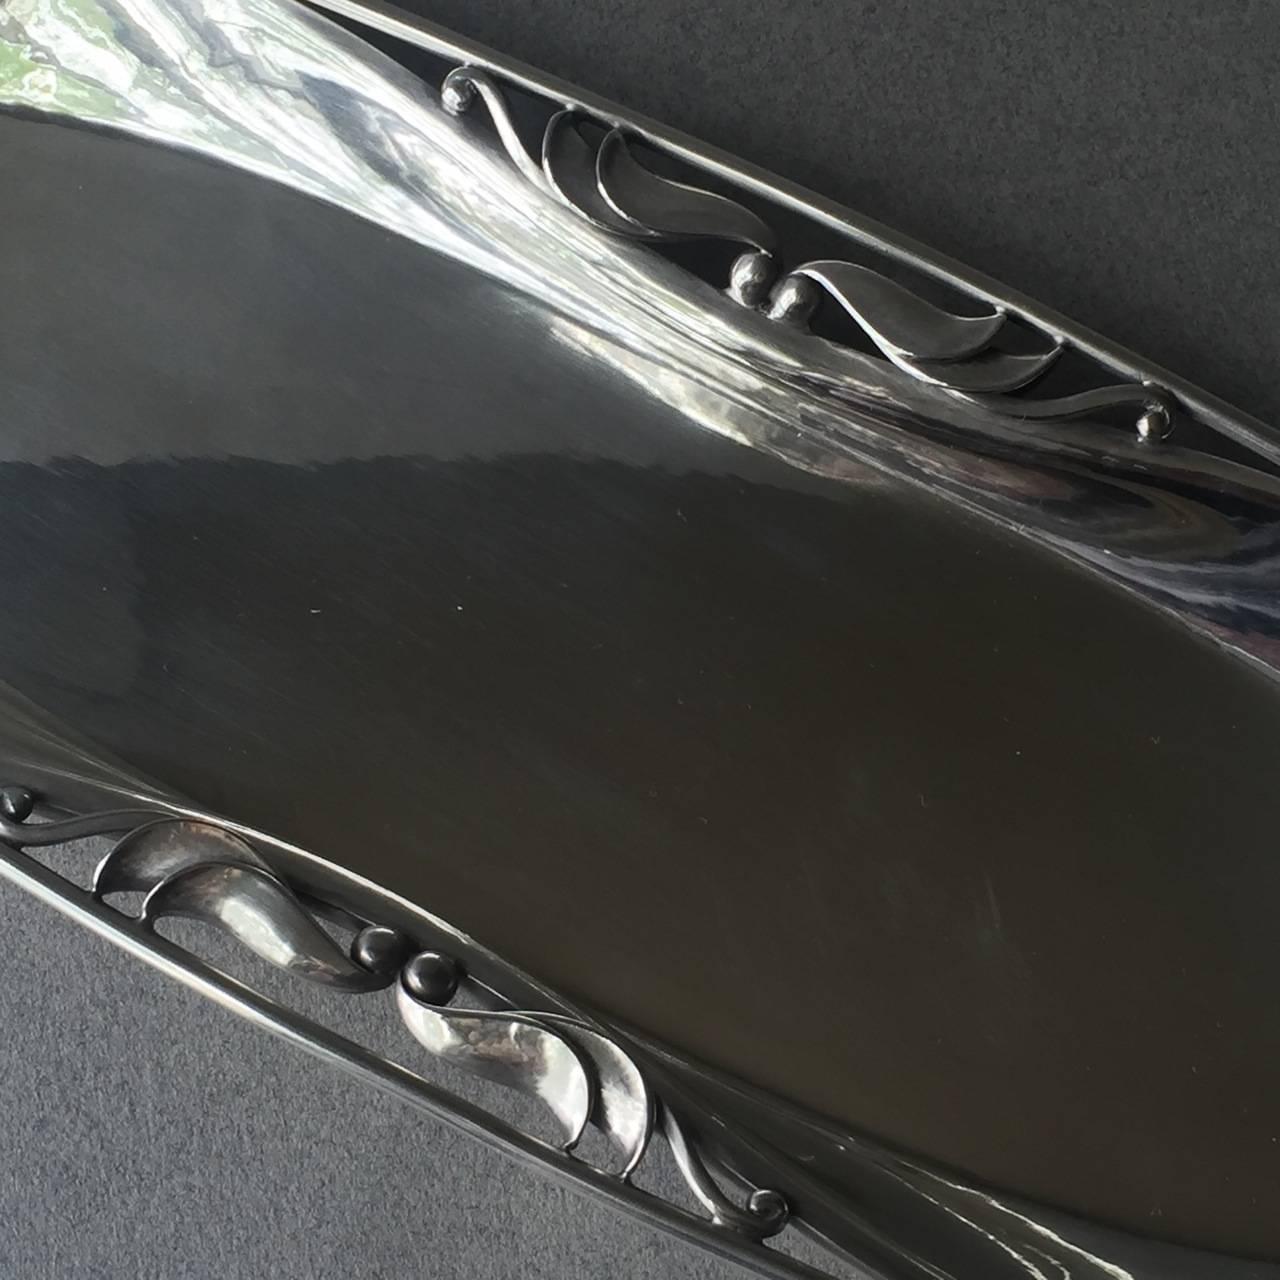 Georg Jensen sterling silver desk tray no. 172 by Harald Nielsen.

Elegant desk tray with refined design. Rare and in superb condition.

Measures: 4